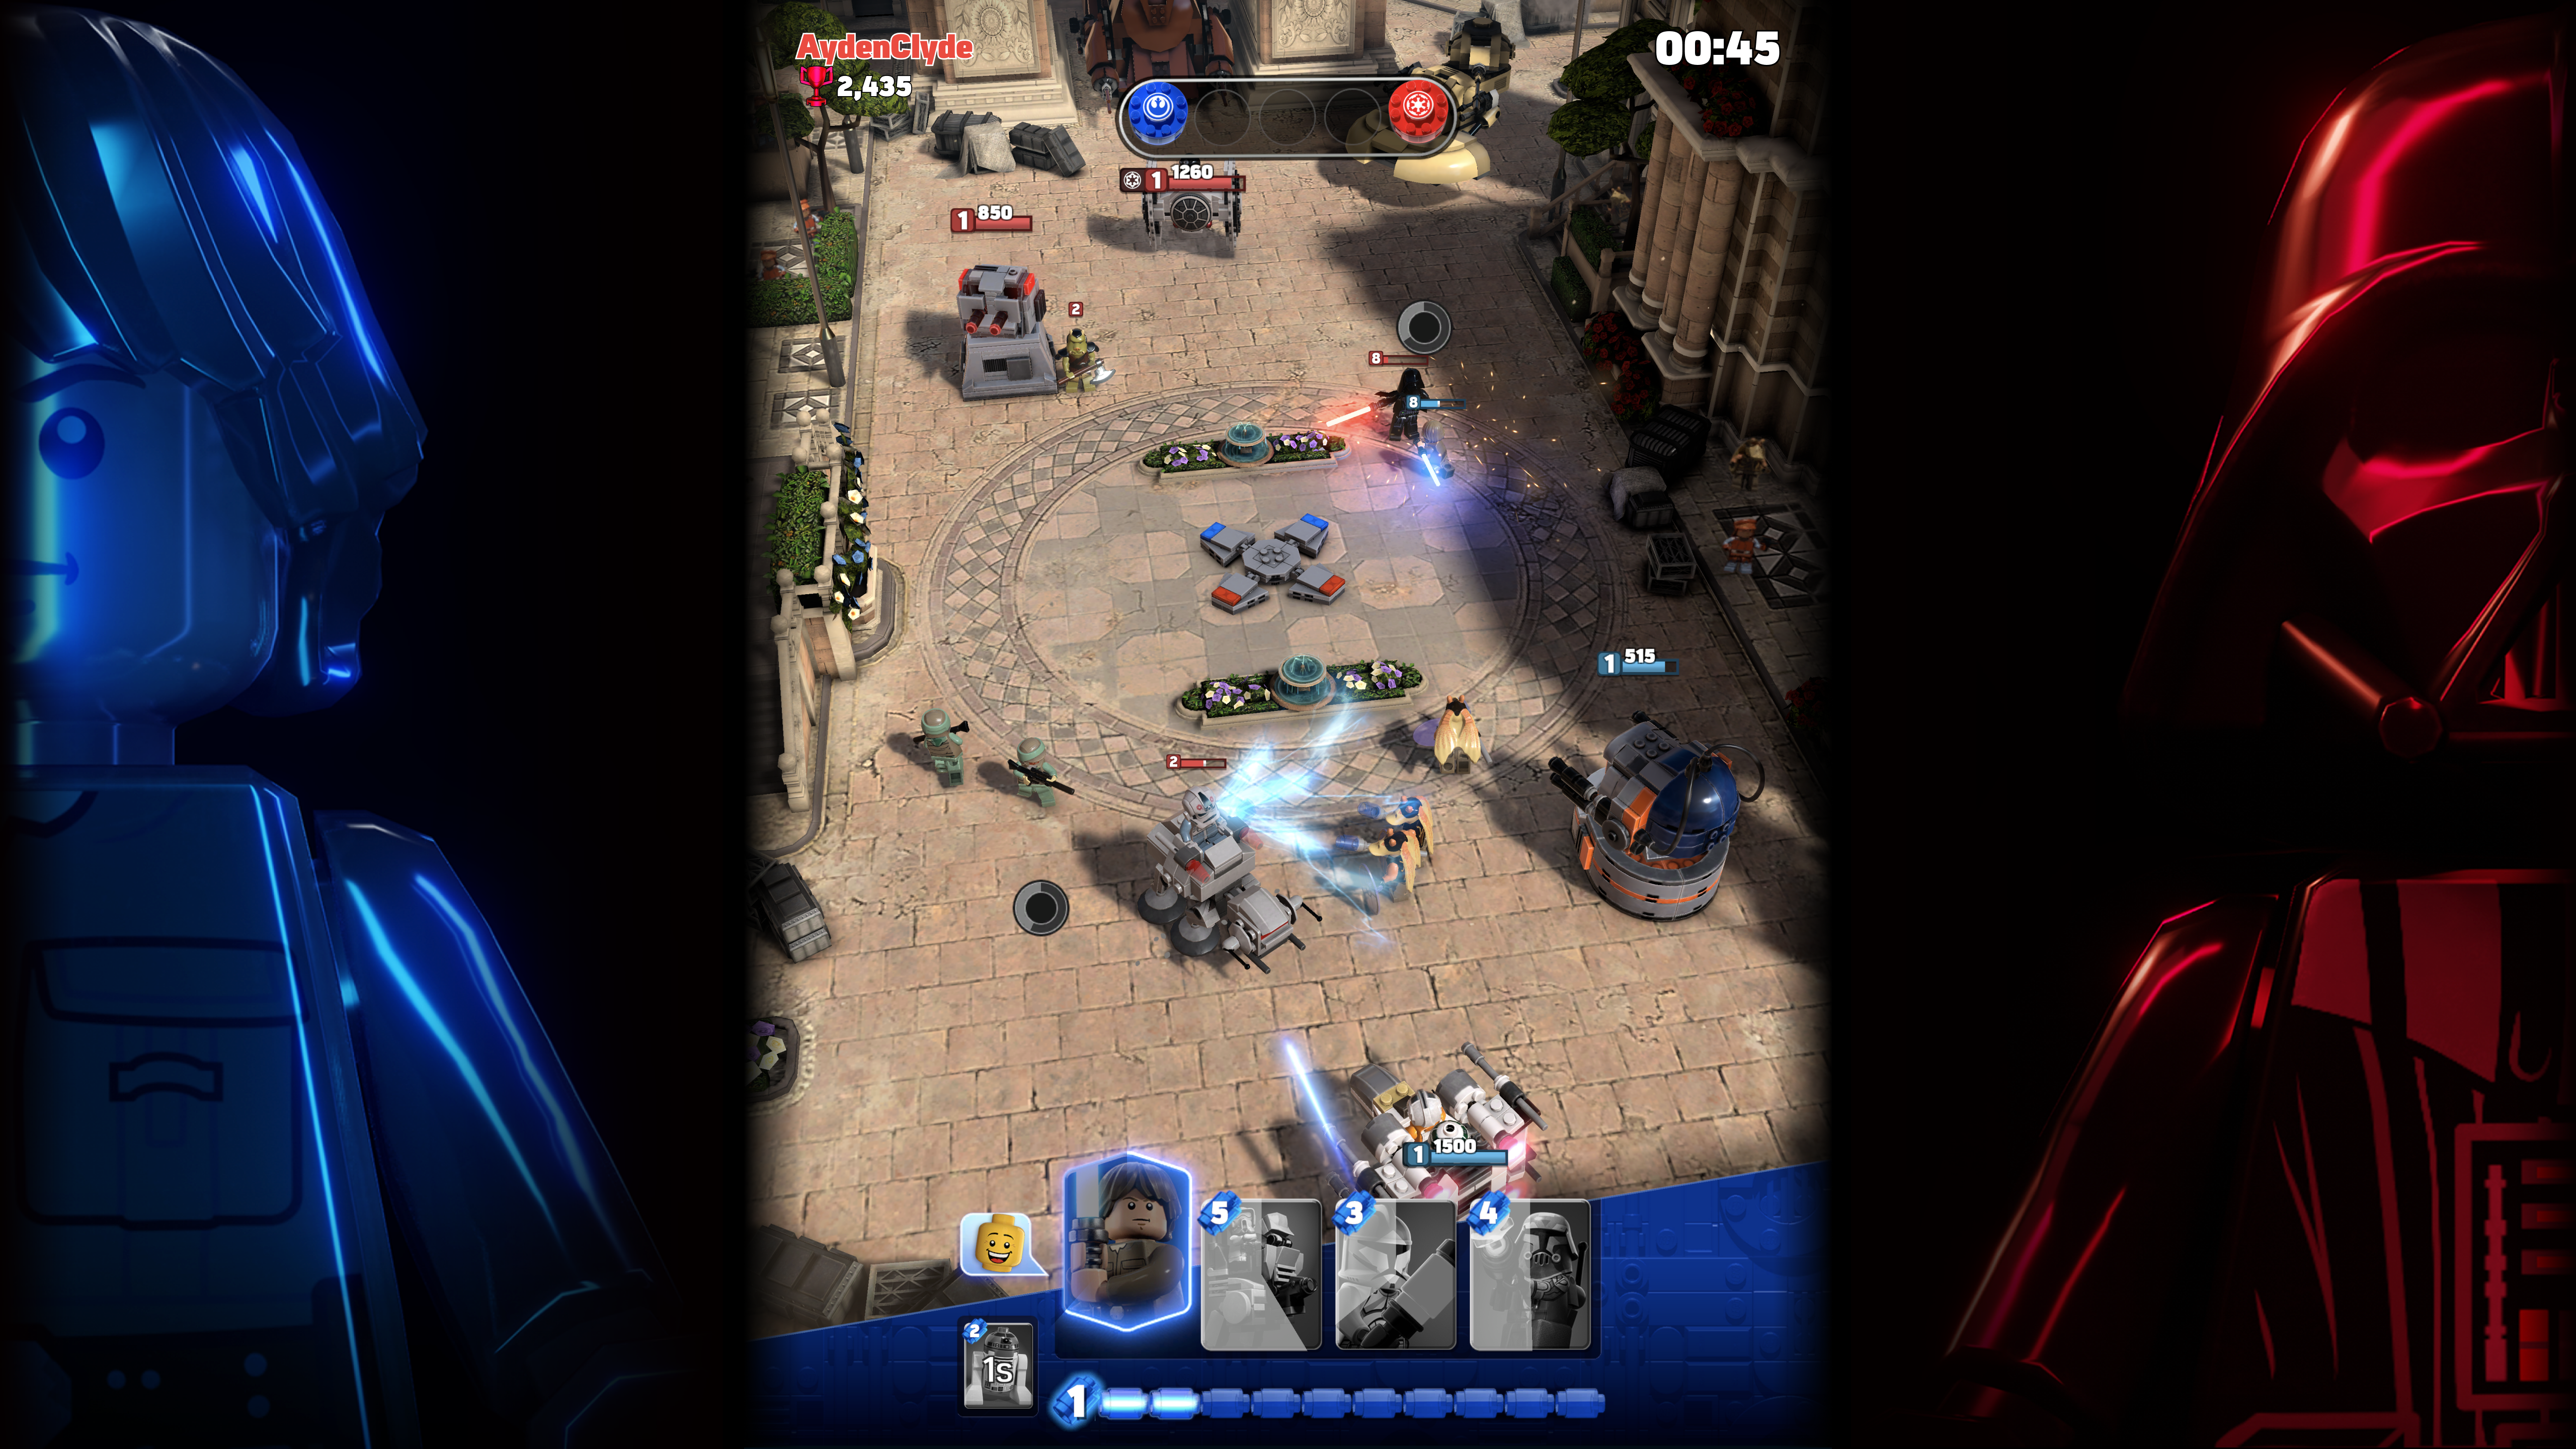 ‘LEGO Star Wars Battles’ from TT Games and Warner Brothers Releases Next Week on Apple Arcade Featuring Characters from All Star Wars Eras